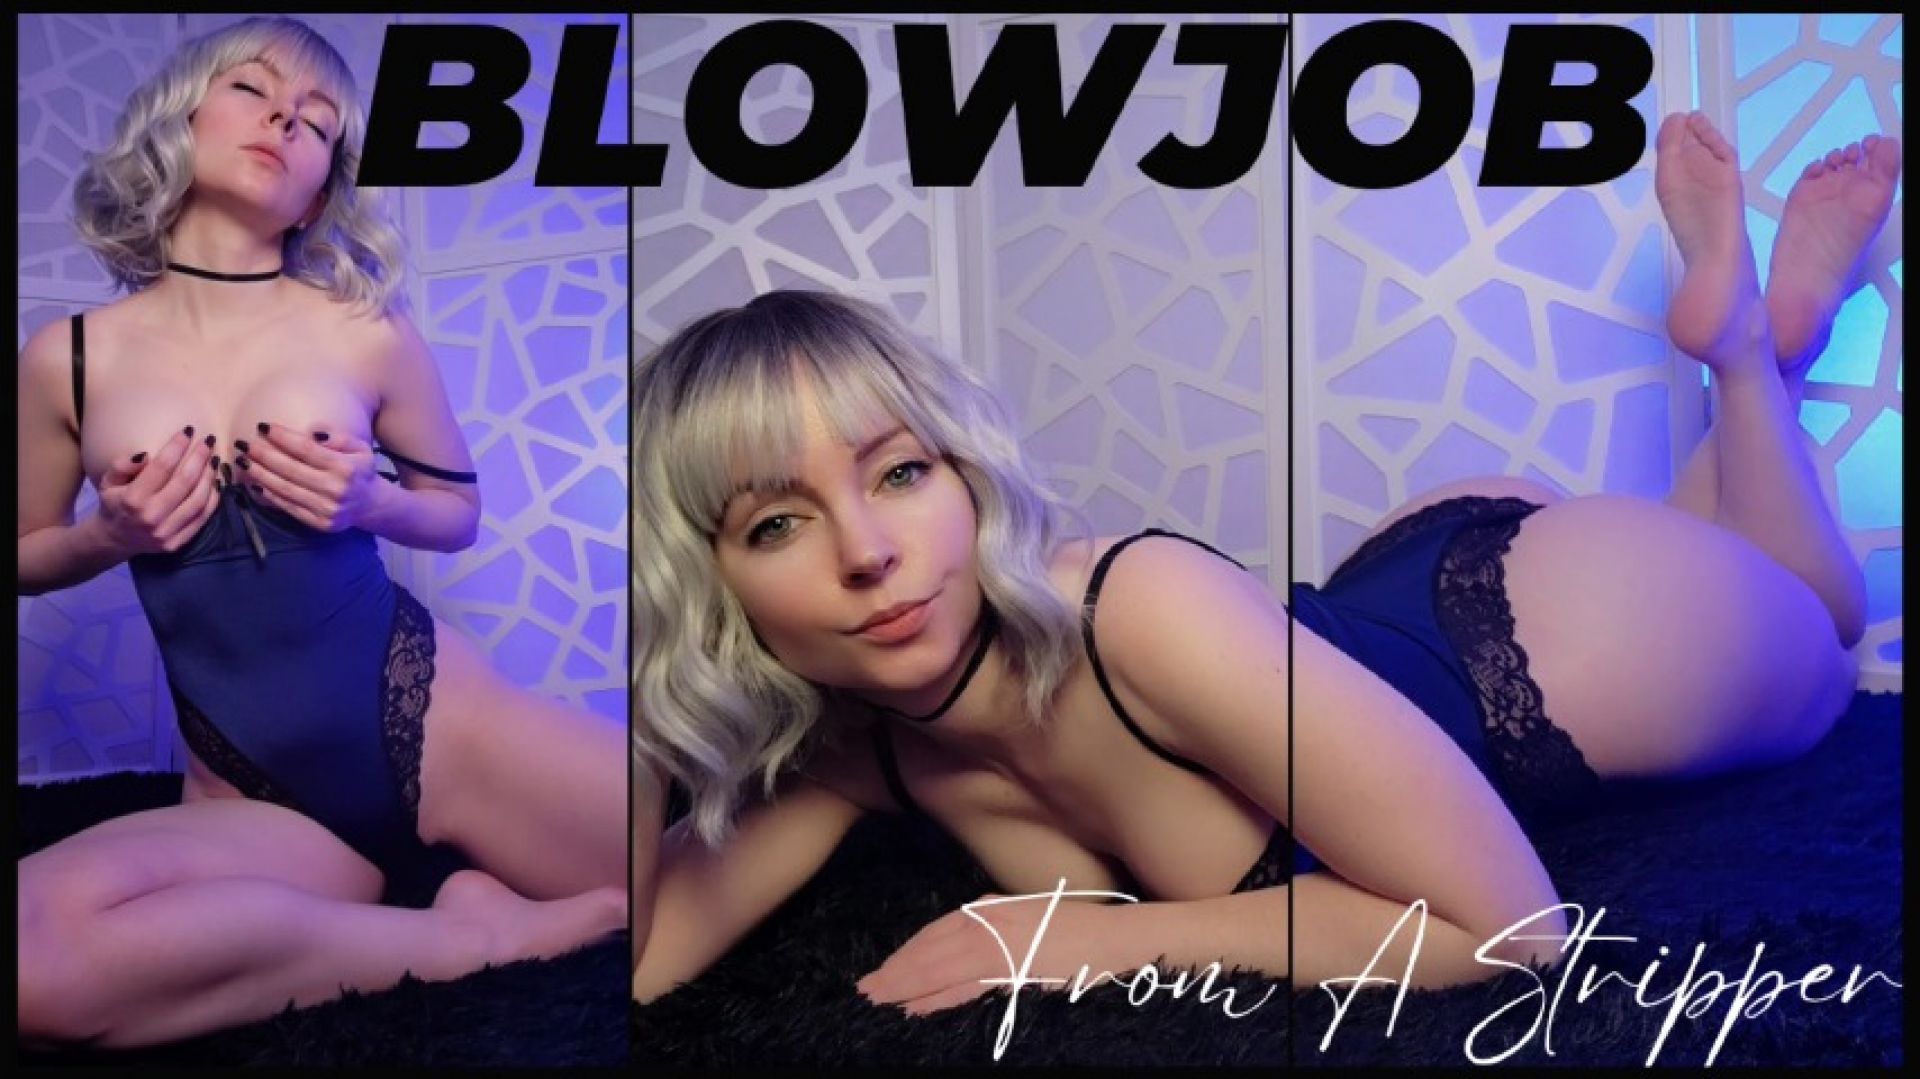 leaked Blowjob From A Stripper in The Pose video thumbnail